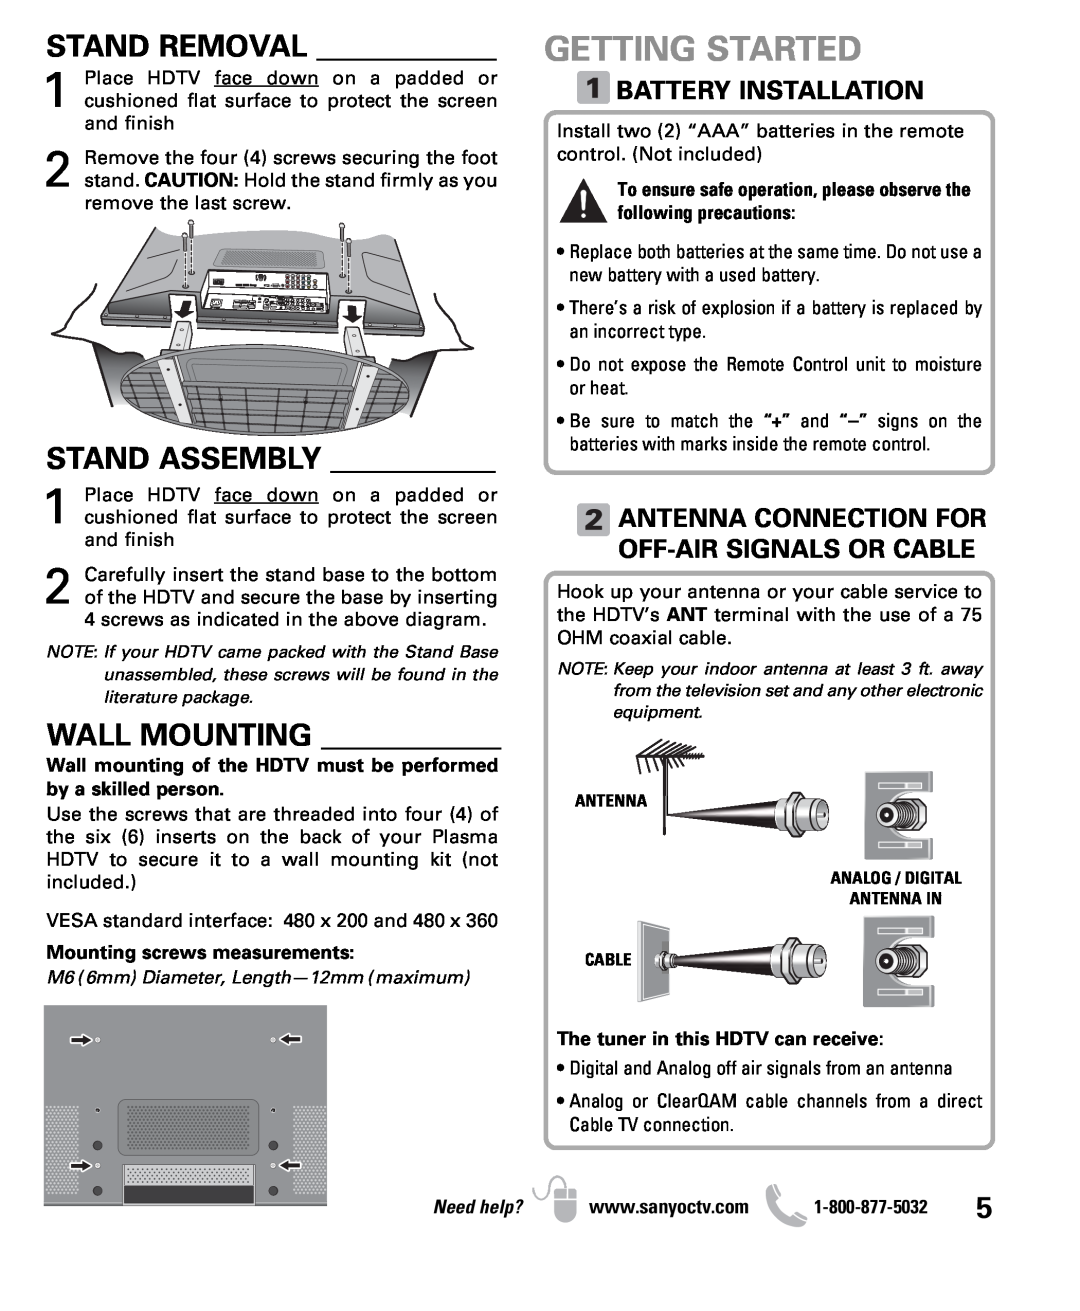 Sanyo DP50710 owner manual Getting Started, Stand Removal, Stand Assembly, Wall Mounting, Battery Installation, Need help? 